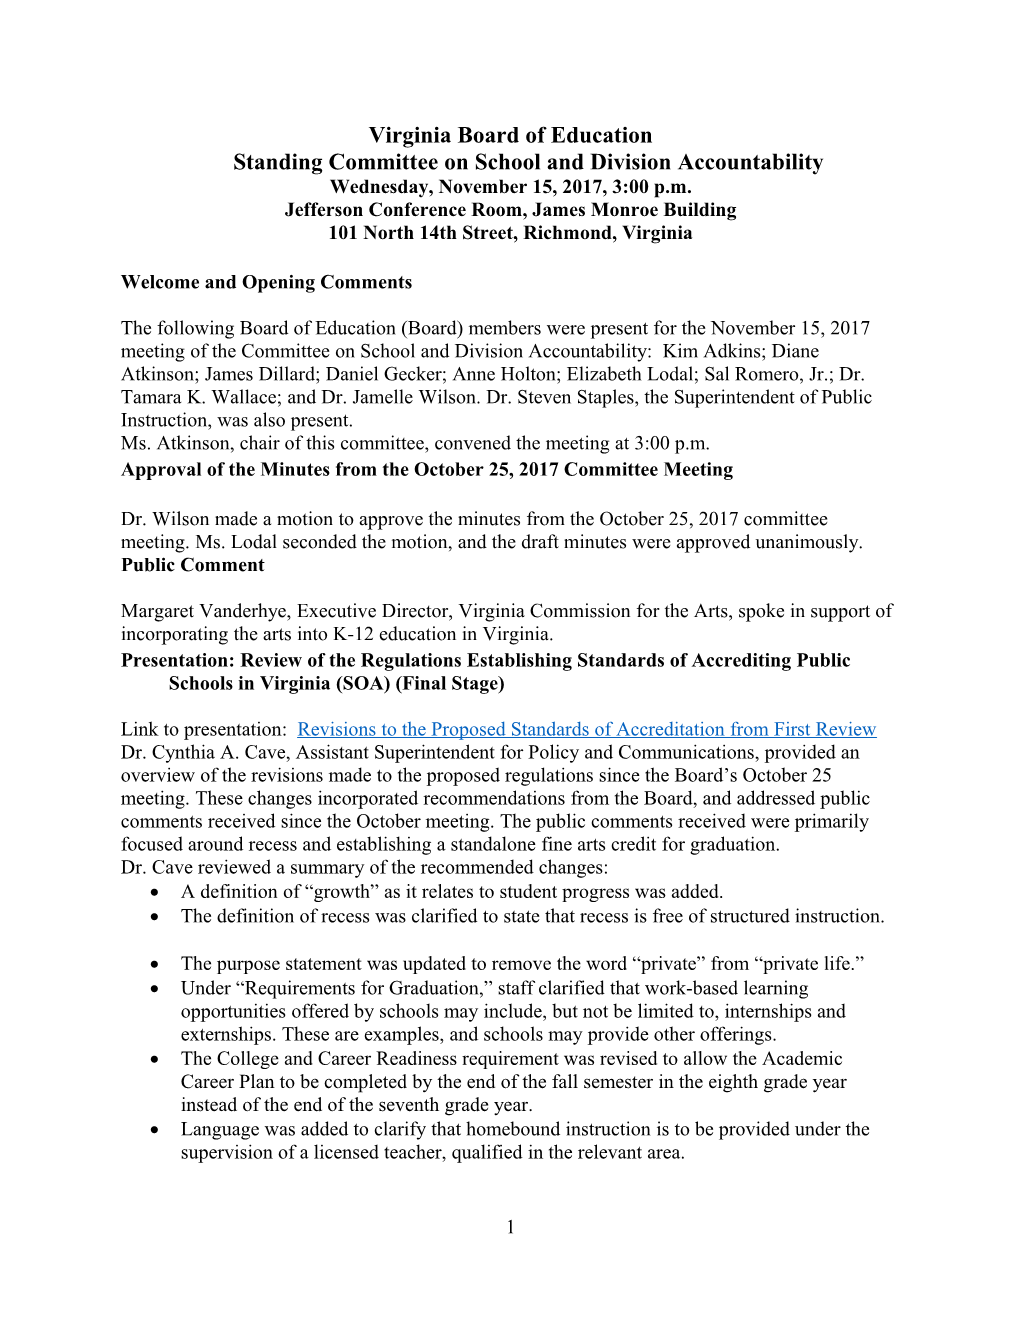 Virginia Board of Educationstanding Committee on School and Division Accountability